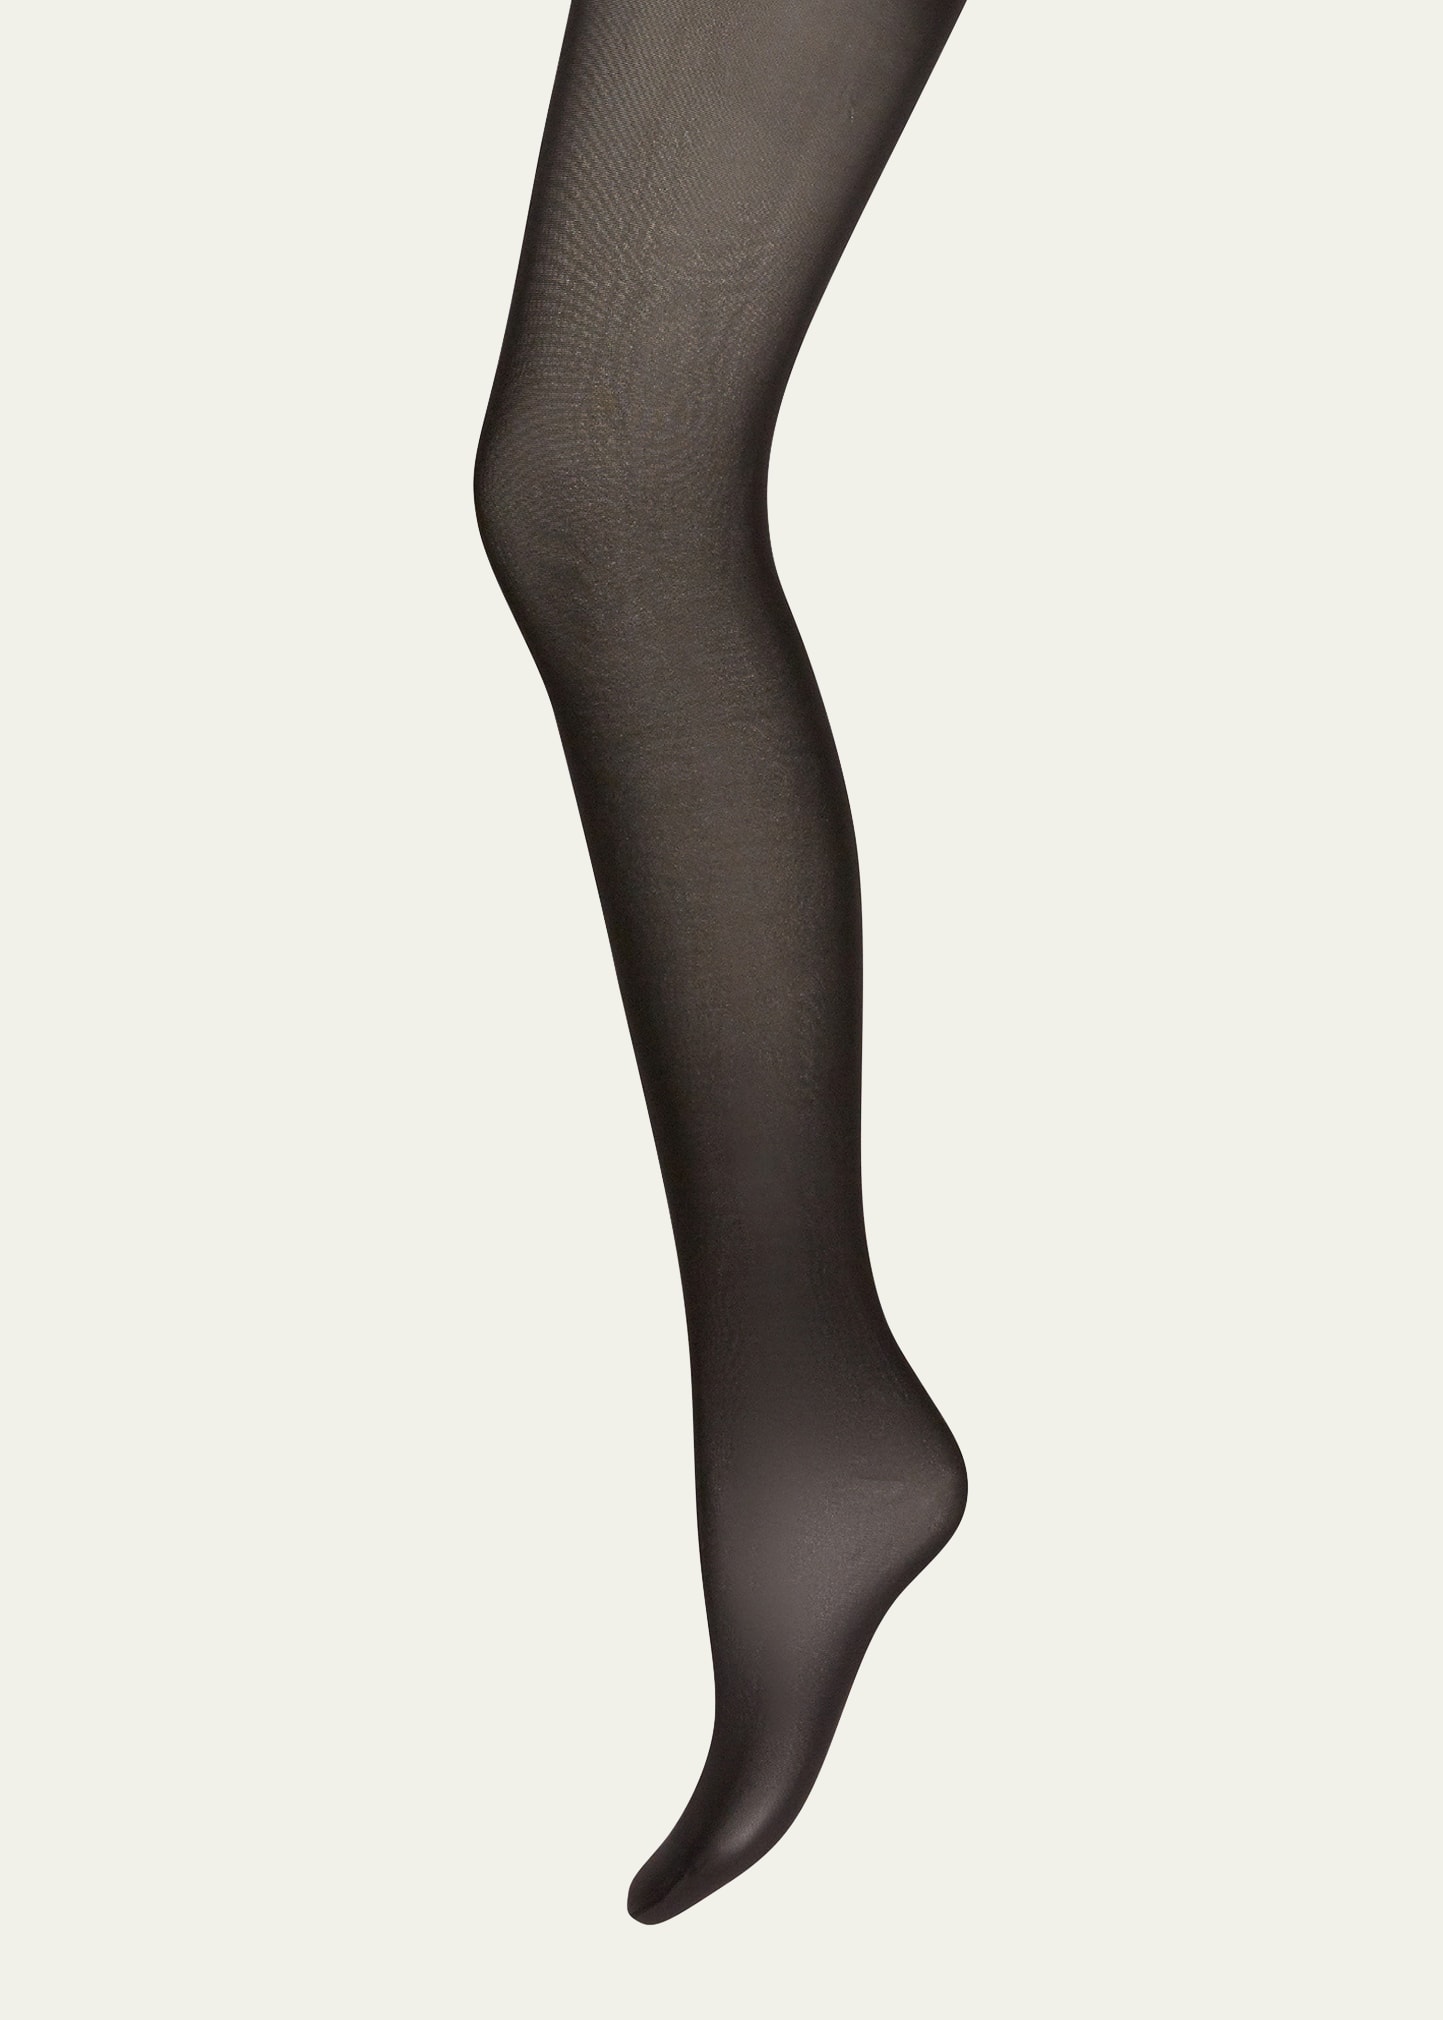 WOLFORD NEON 40 GLOSSY TIGHTS